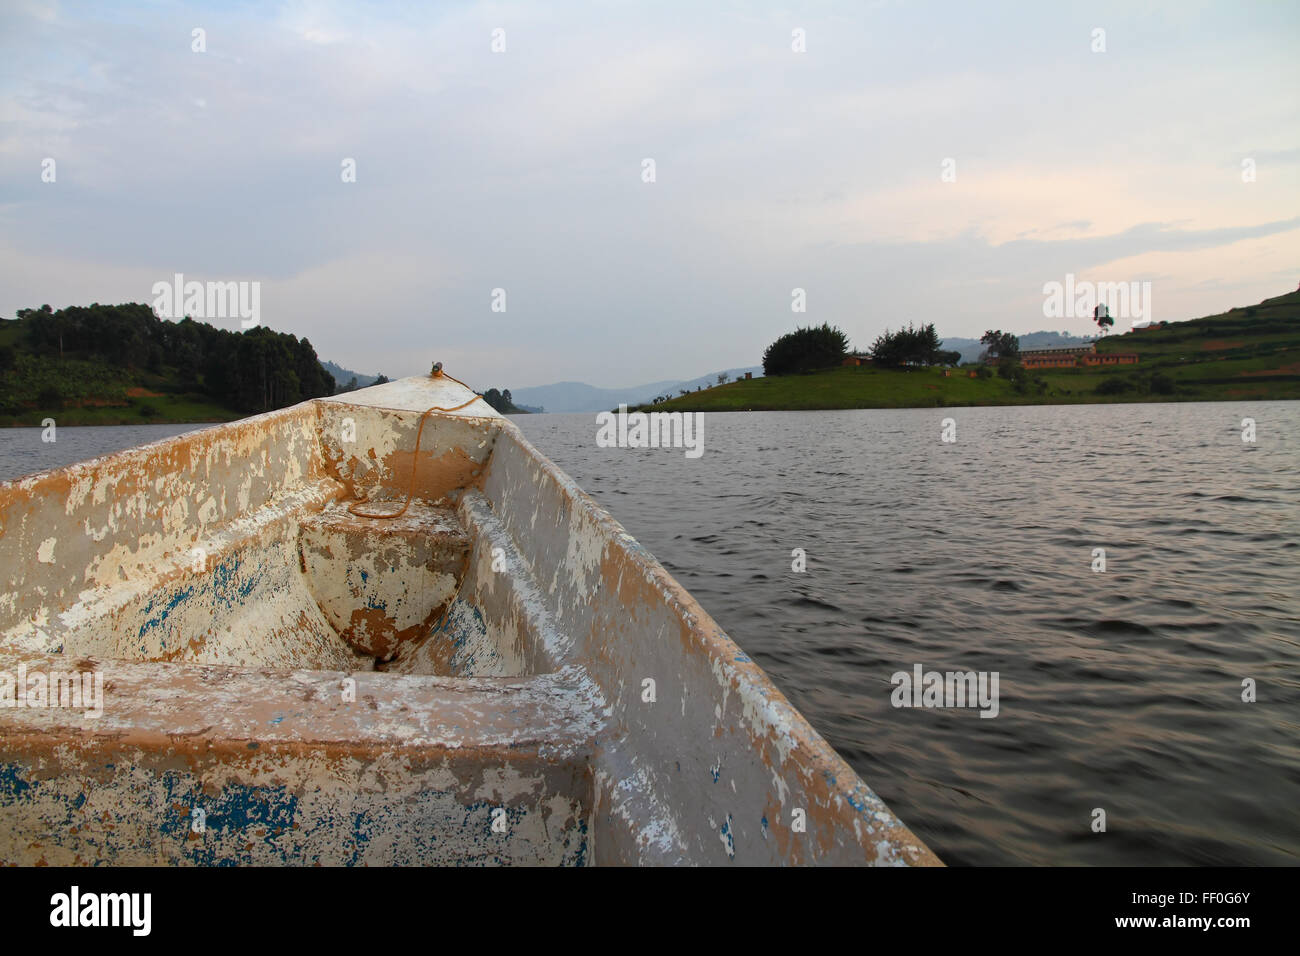 The front of a old boat launch on Lake Bunyoni, Uganda, surrounded by the homes of the community Stock Photo